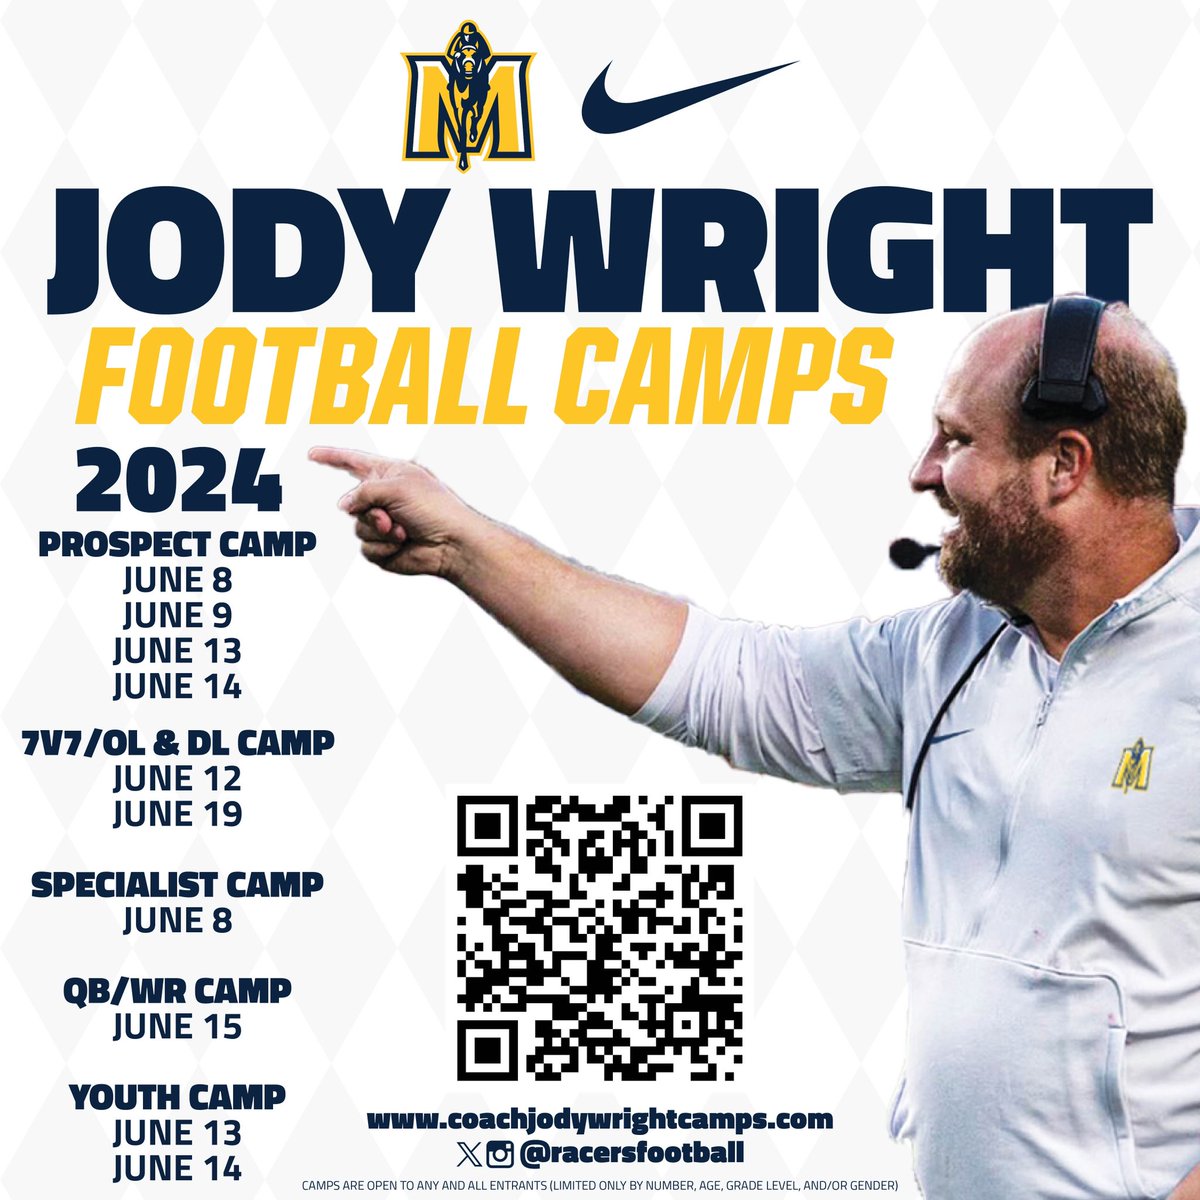 Make sure you sign up for football camp as it’s a great way to be evaluated. Will be coached hard and a good way to get better heading into the season. @racersfootball @WrightJody